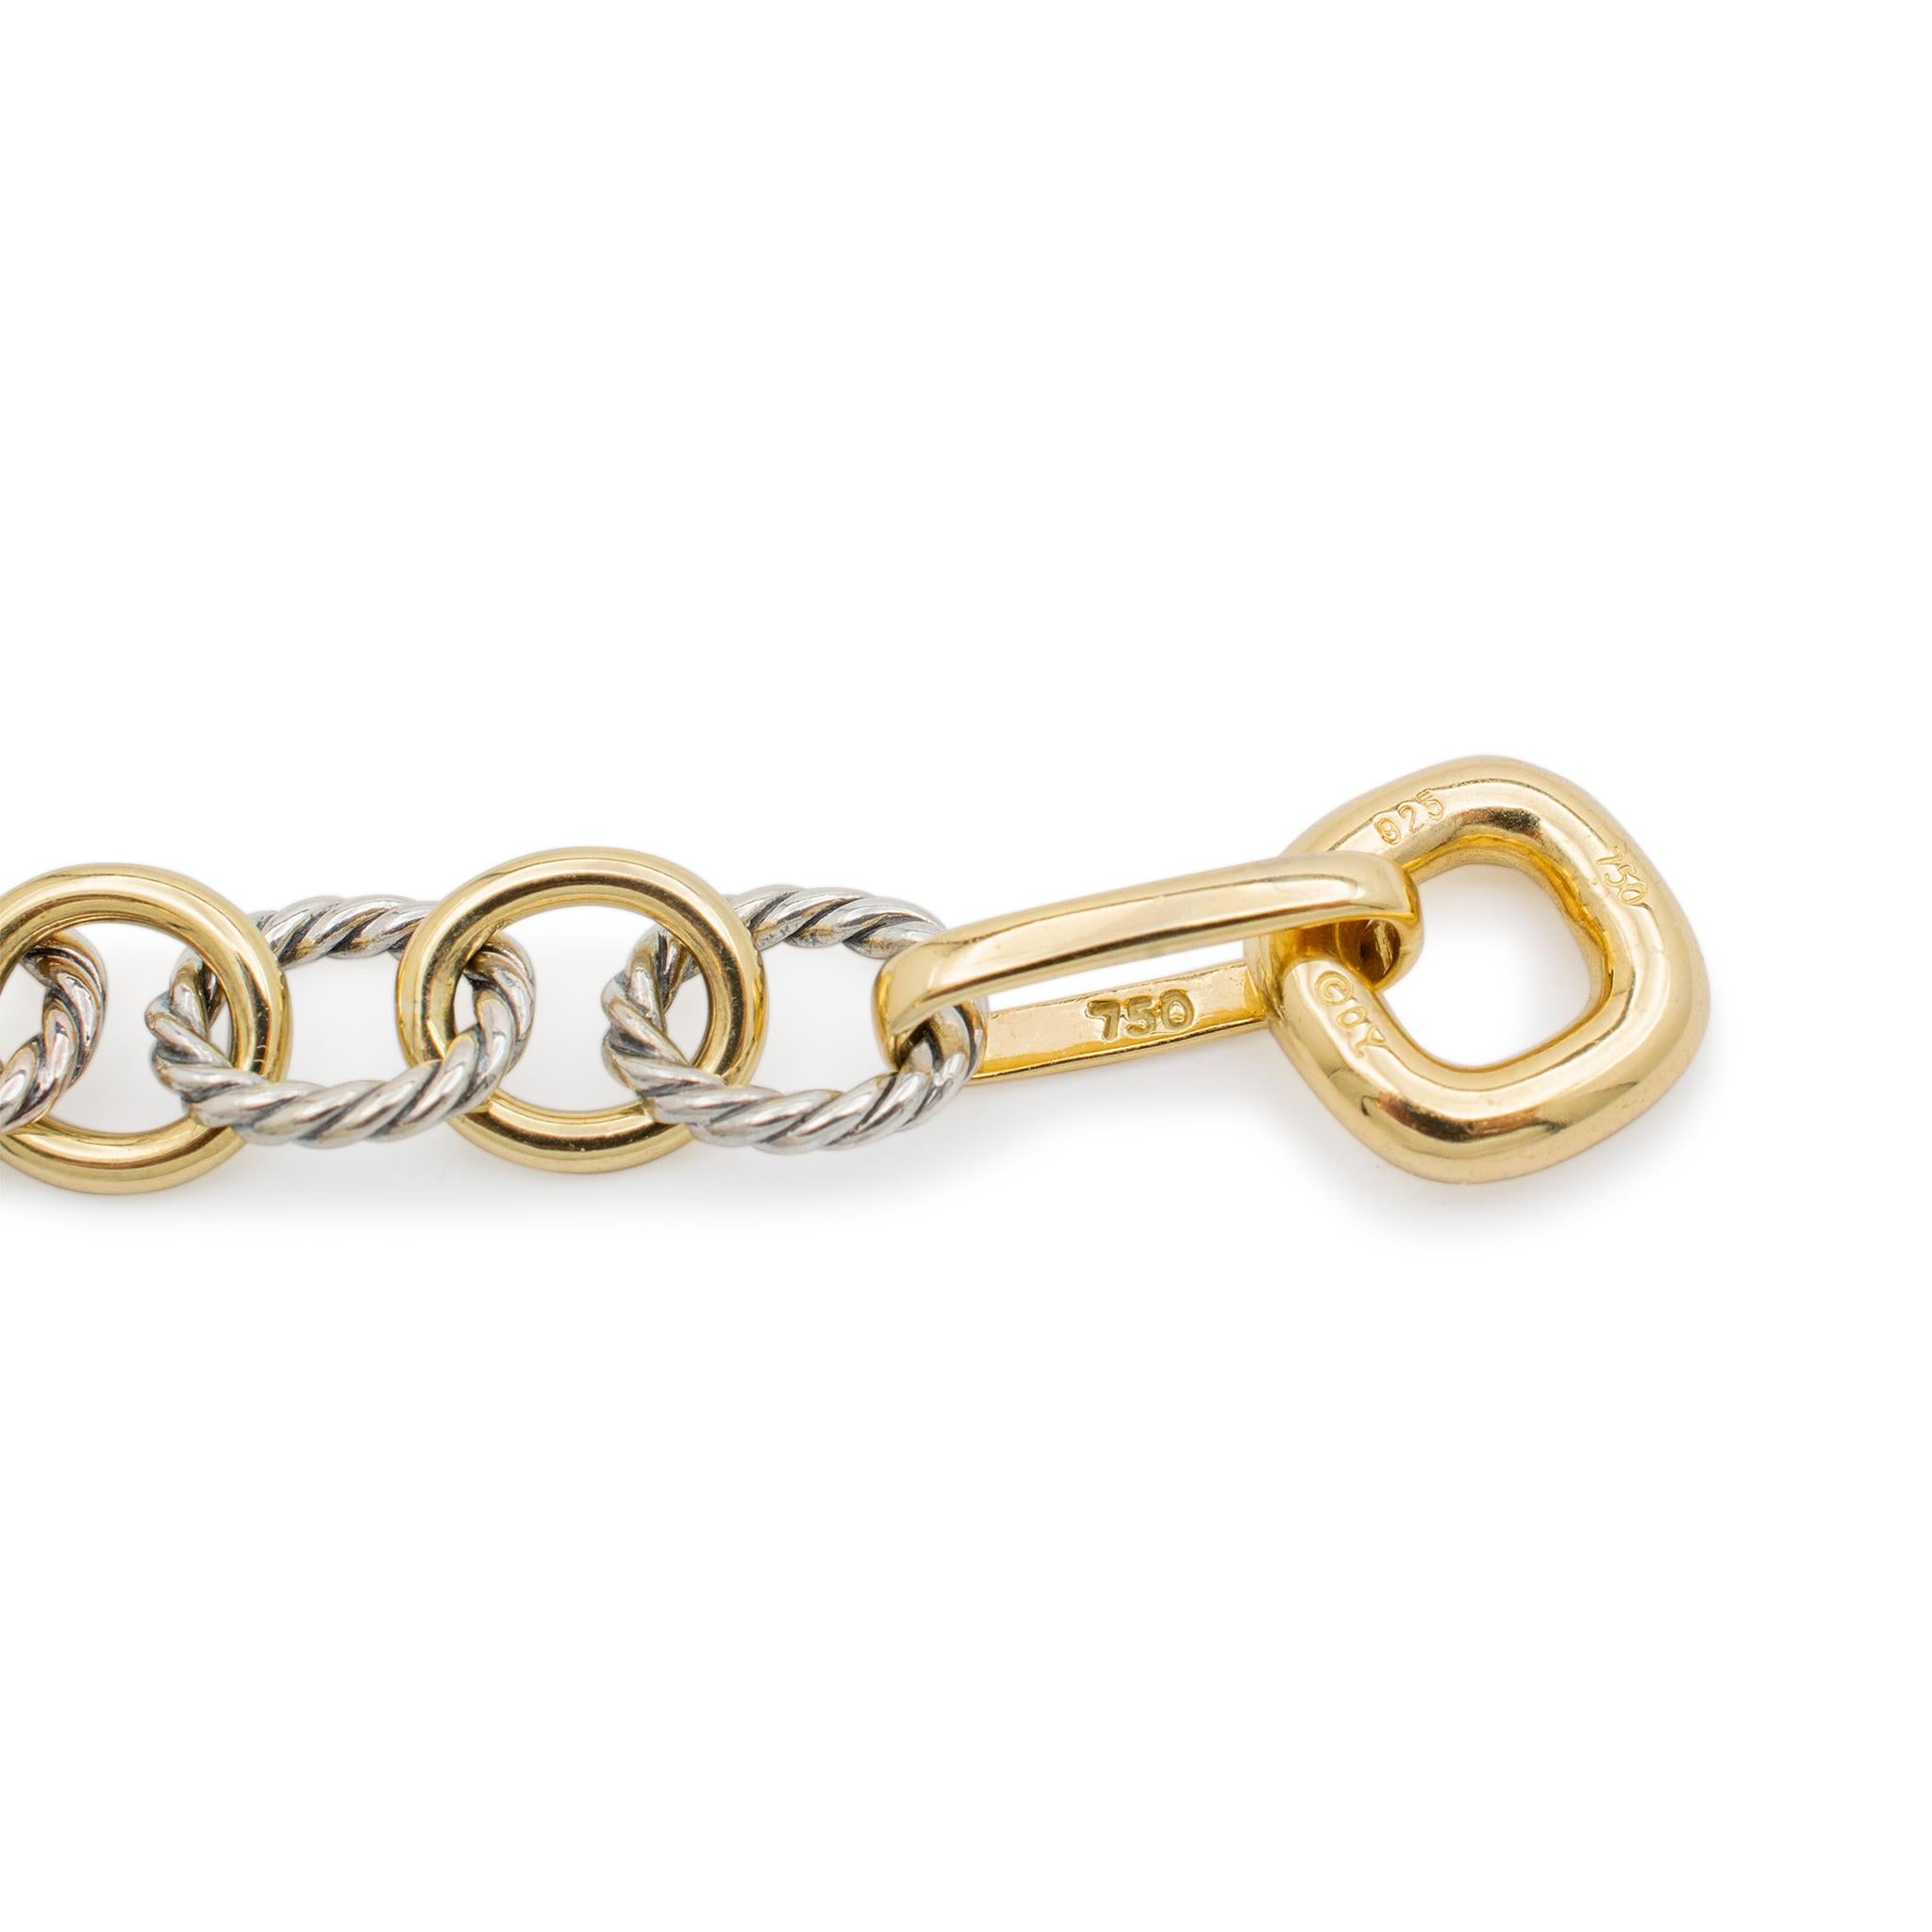 David Yurman 18k Yellow Gold & 925 Sterling Silver Oval Link Chain Bracelet In Excellent Condition For Sale In Houston, TX